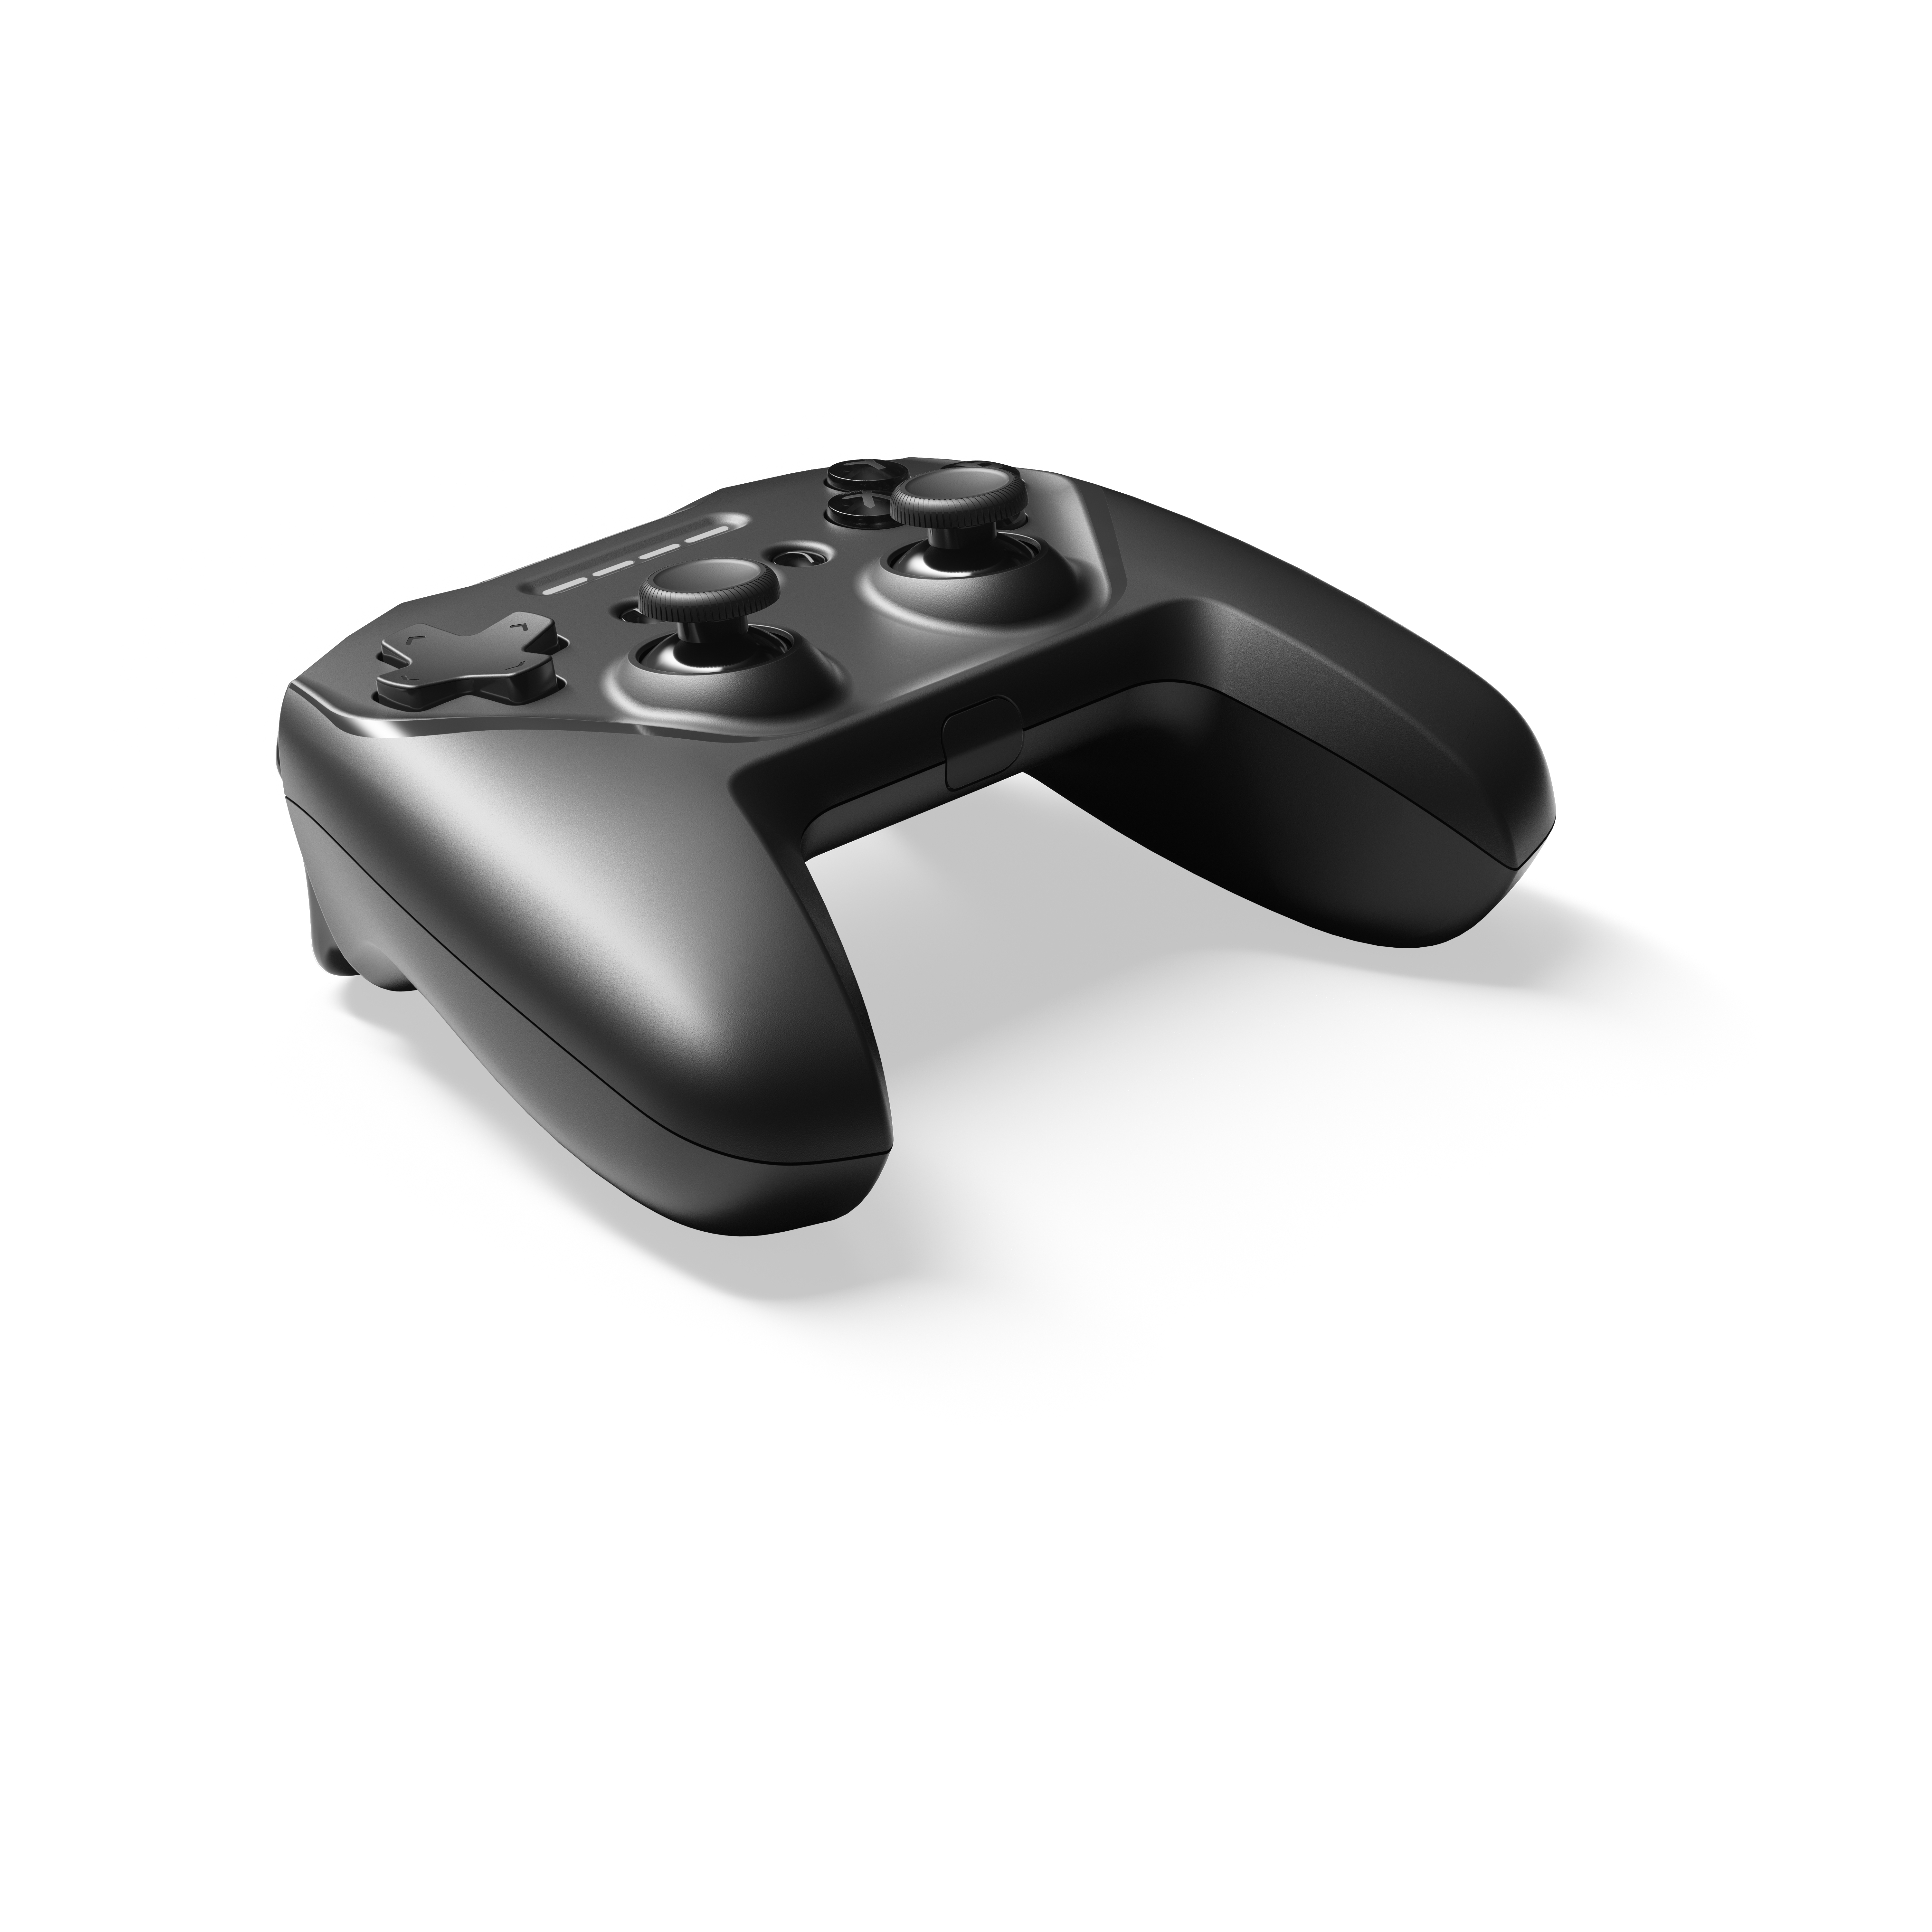 STEELSERIES STRATUS Other für PC, Controller Schwarz Android, DUO Gaming